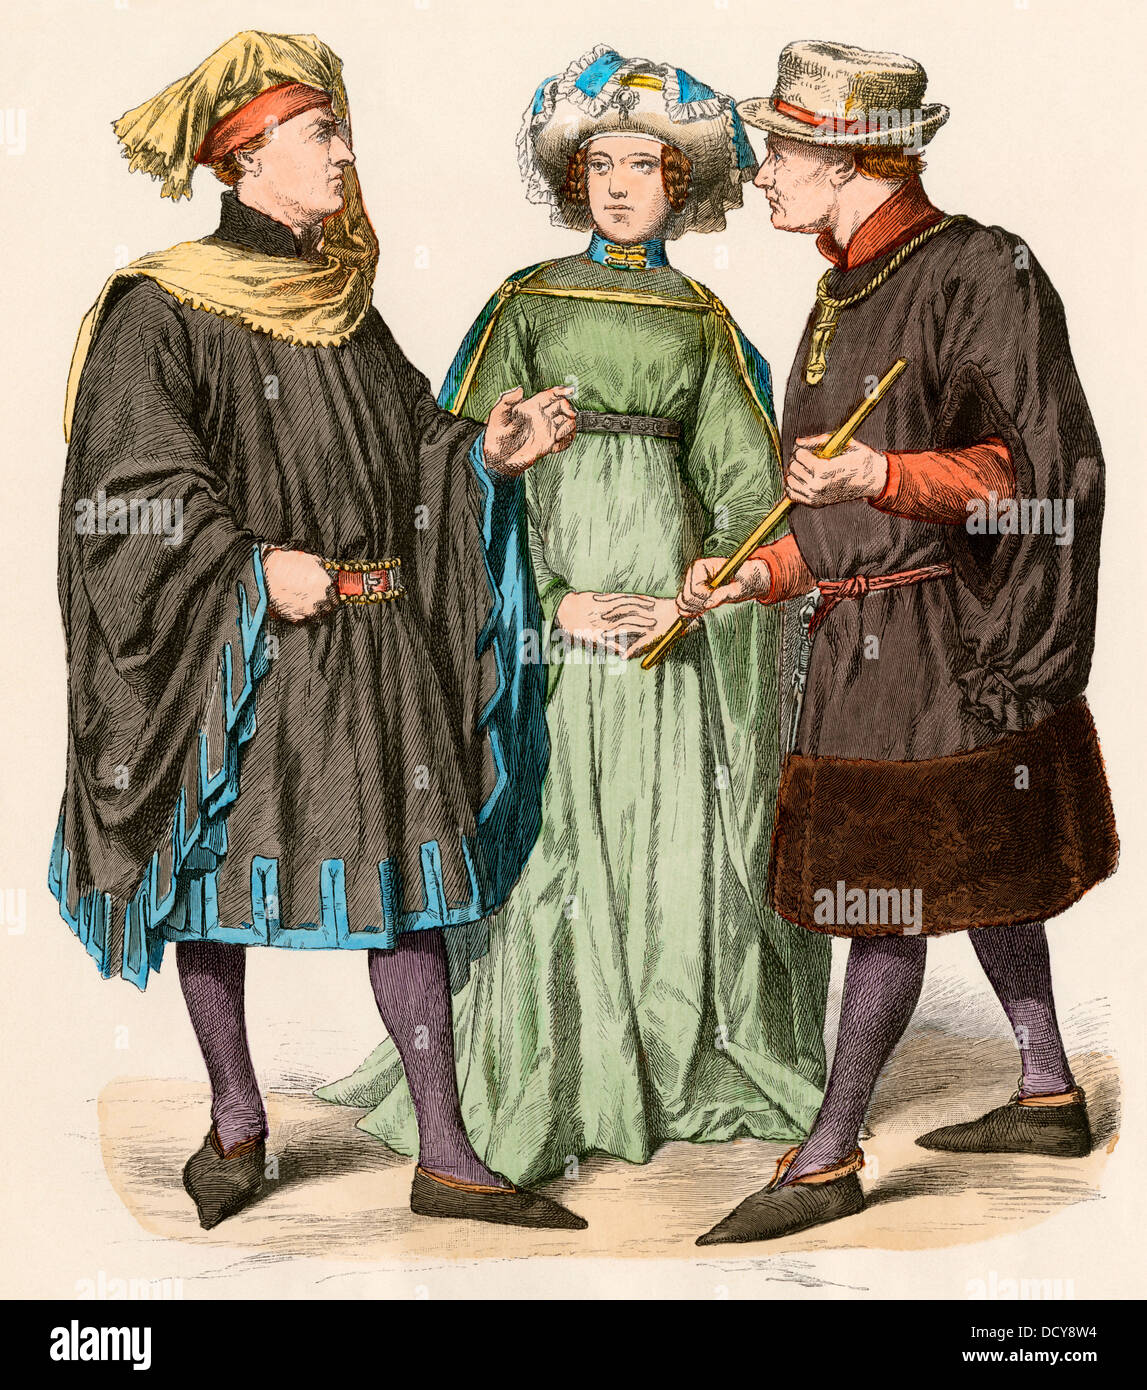 Citizens of Holland, late 1400s. Hand-colored print Stock Photo - Alamy